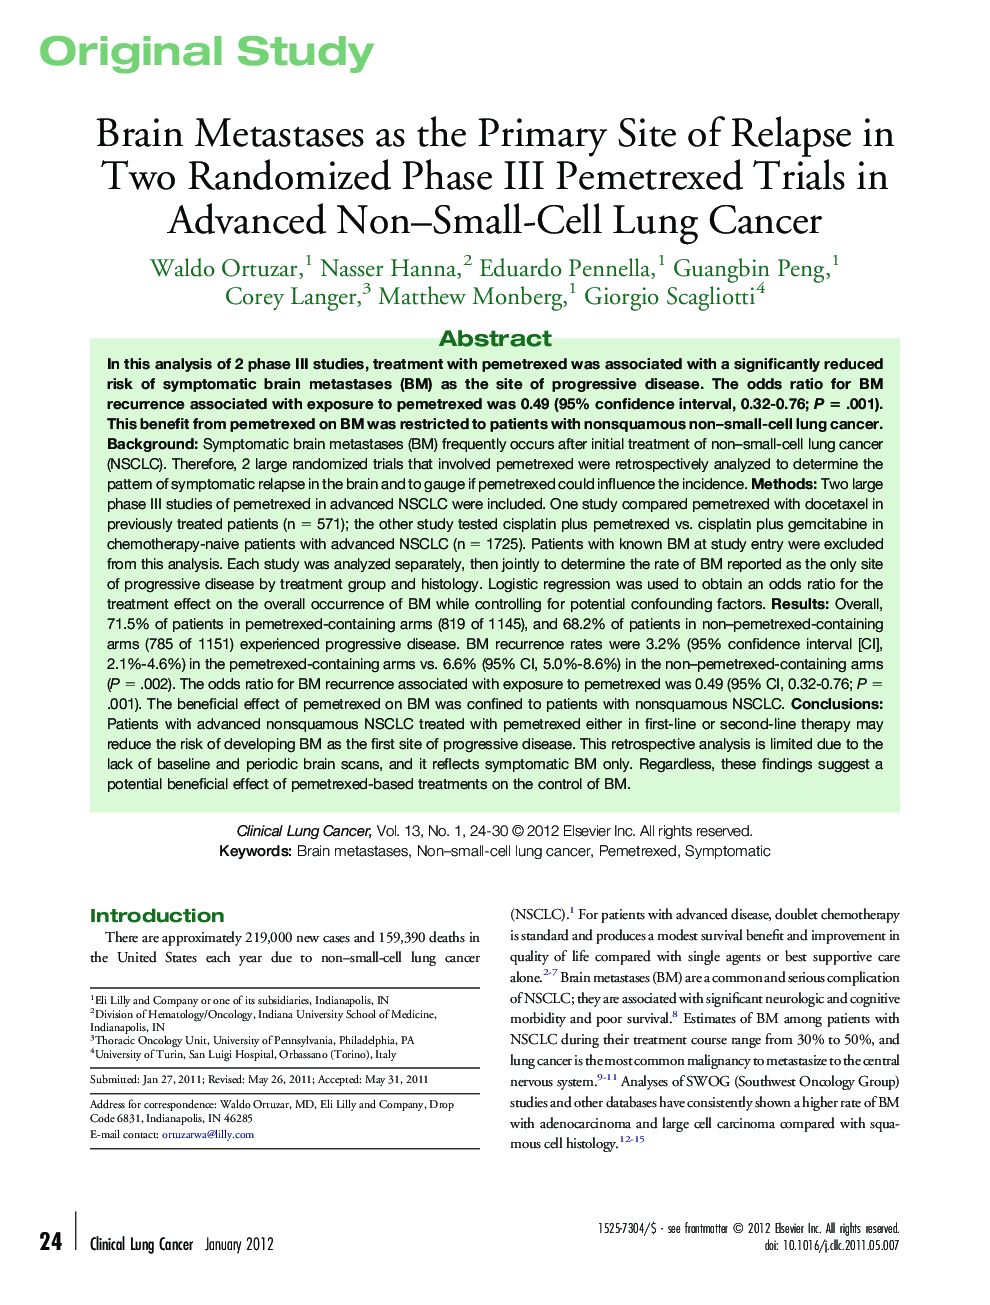 Brain Metastases as the Primary Site of Relapse in Two Randomized Phase III Pemetrexed Trials in Advanced Non–Small-Cell Lung Cancer